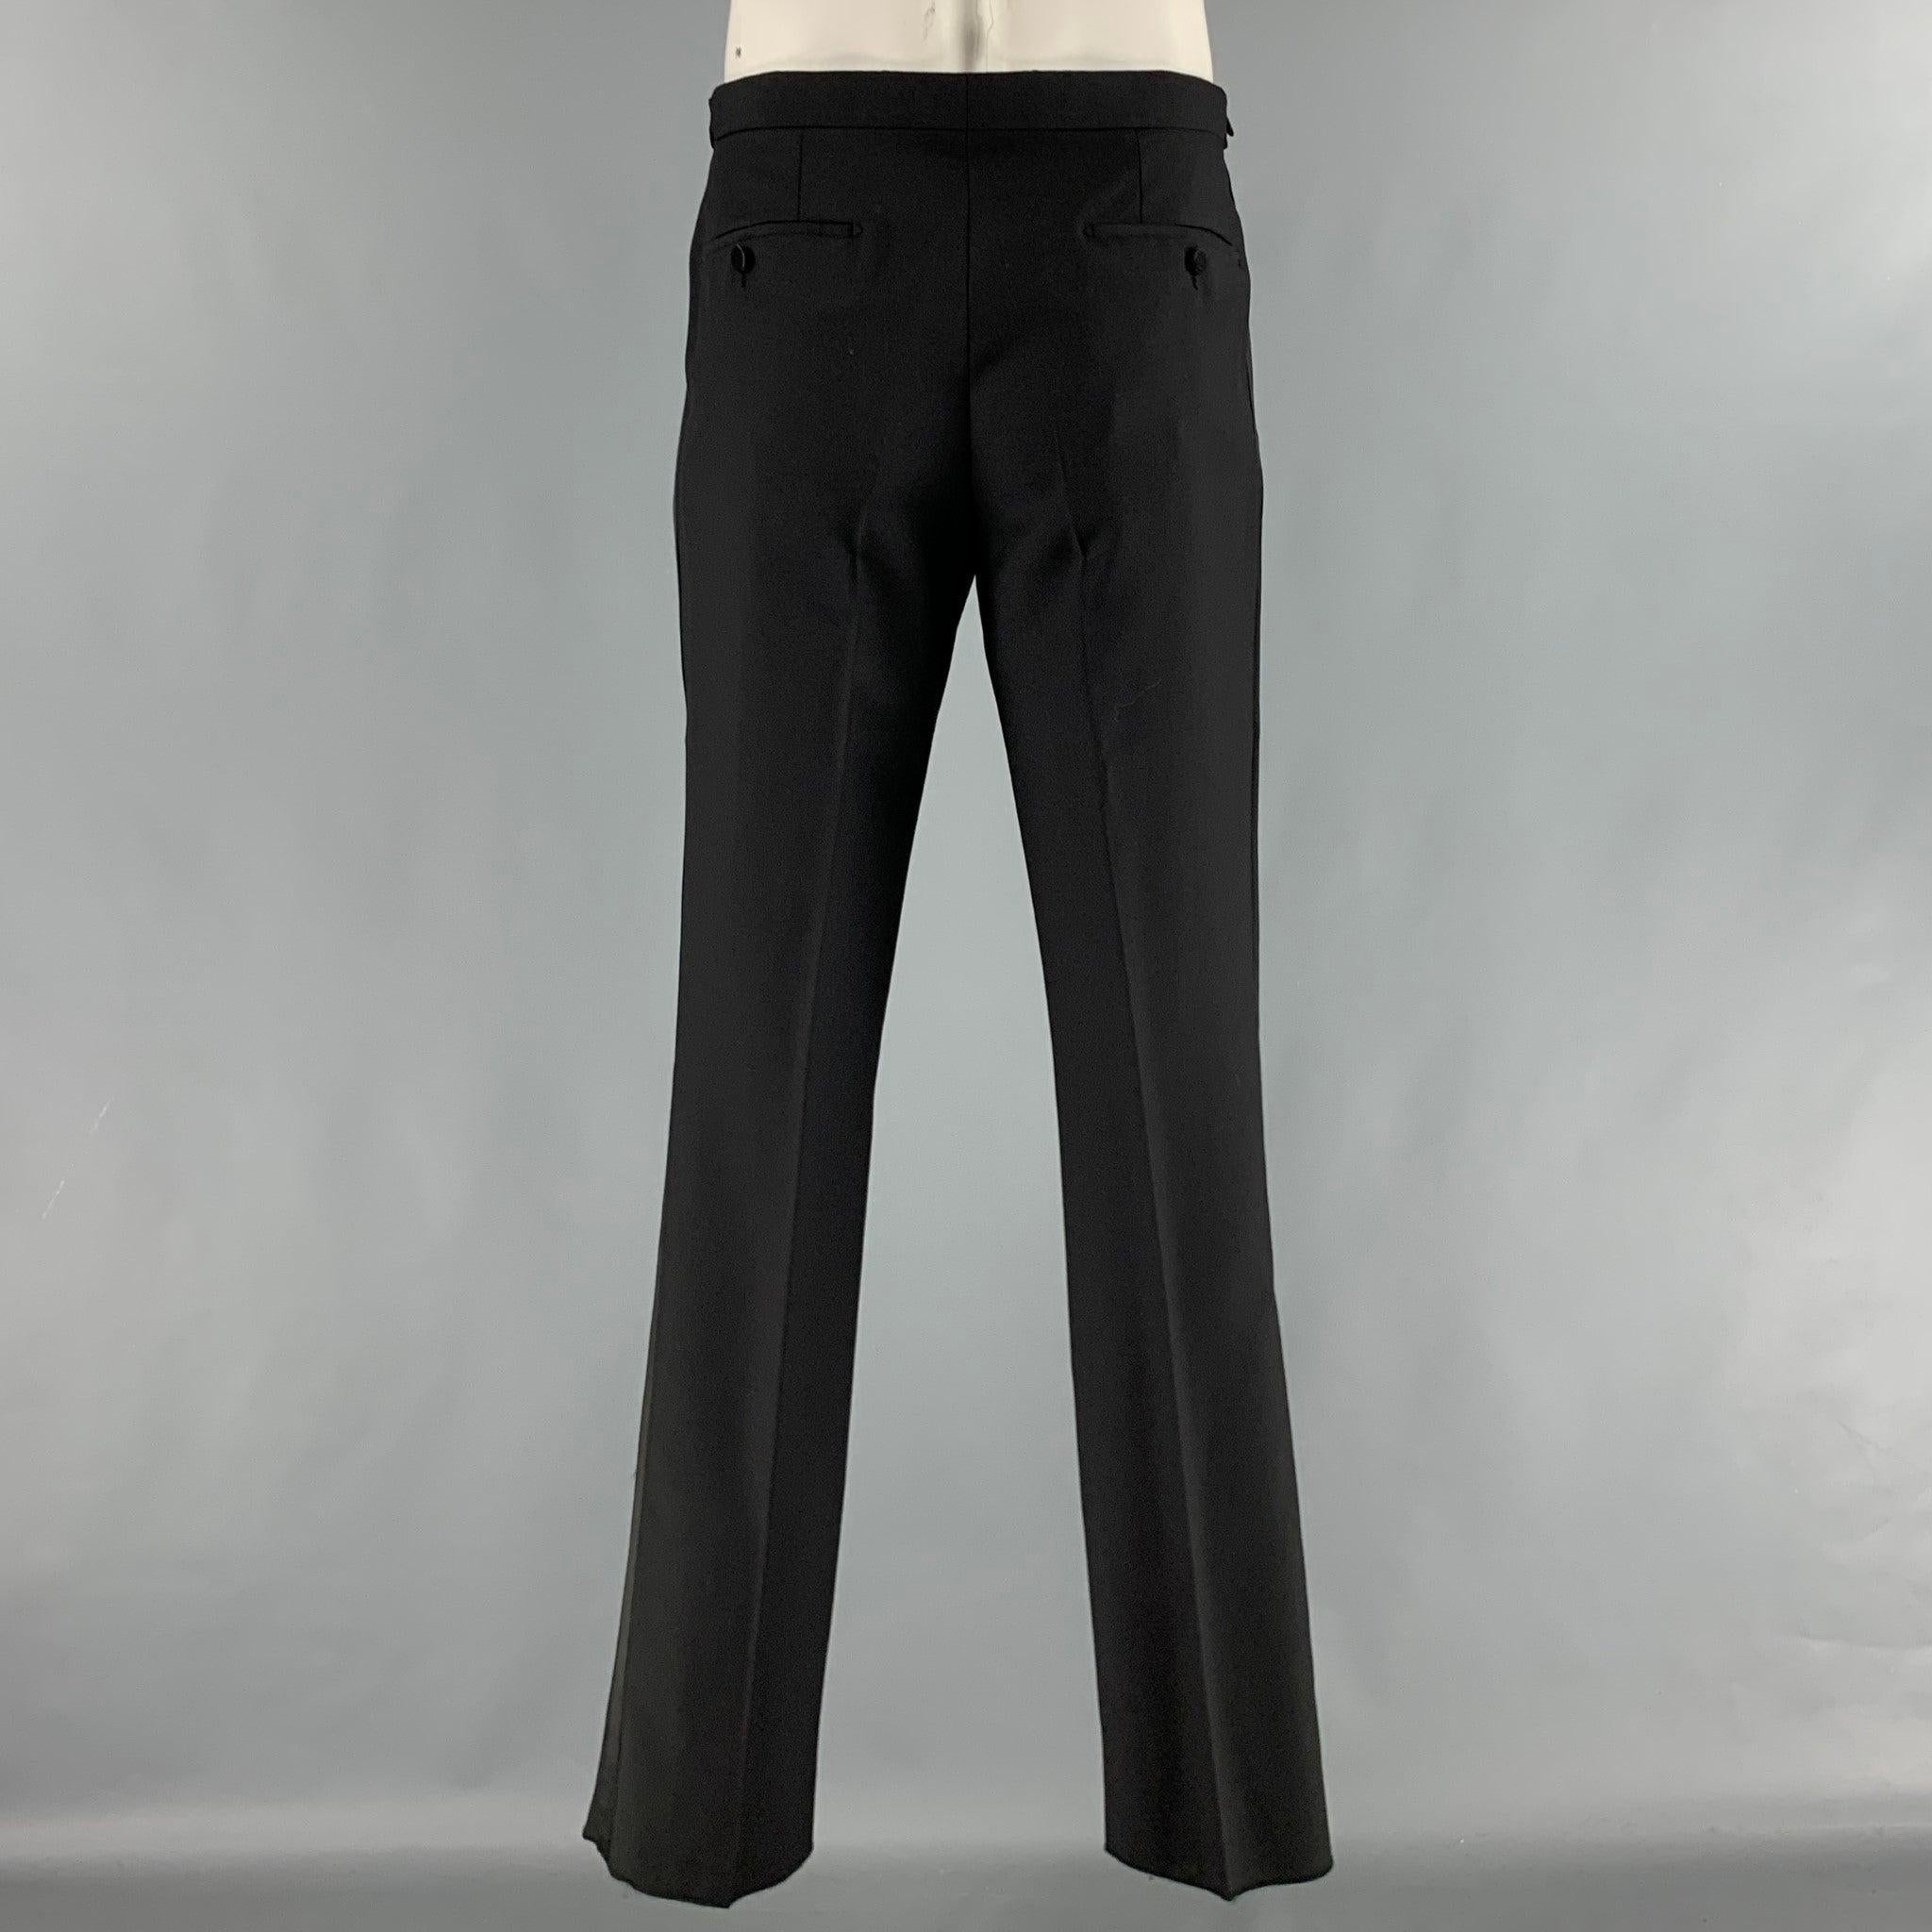 BURBERRY LONDON tuxedo dress pants comes in a black cupro woven material featuring a flat front, side tabs, and a button fly closure. Made in Italy. Excellent Pre-Owned Condition. 

Marked:   52R 

Measurements: 
  Waist: 34 inches Rise: 9 inches